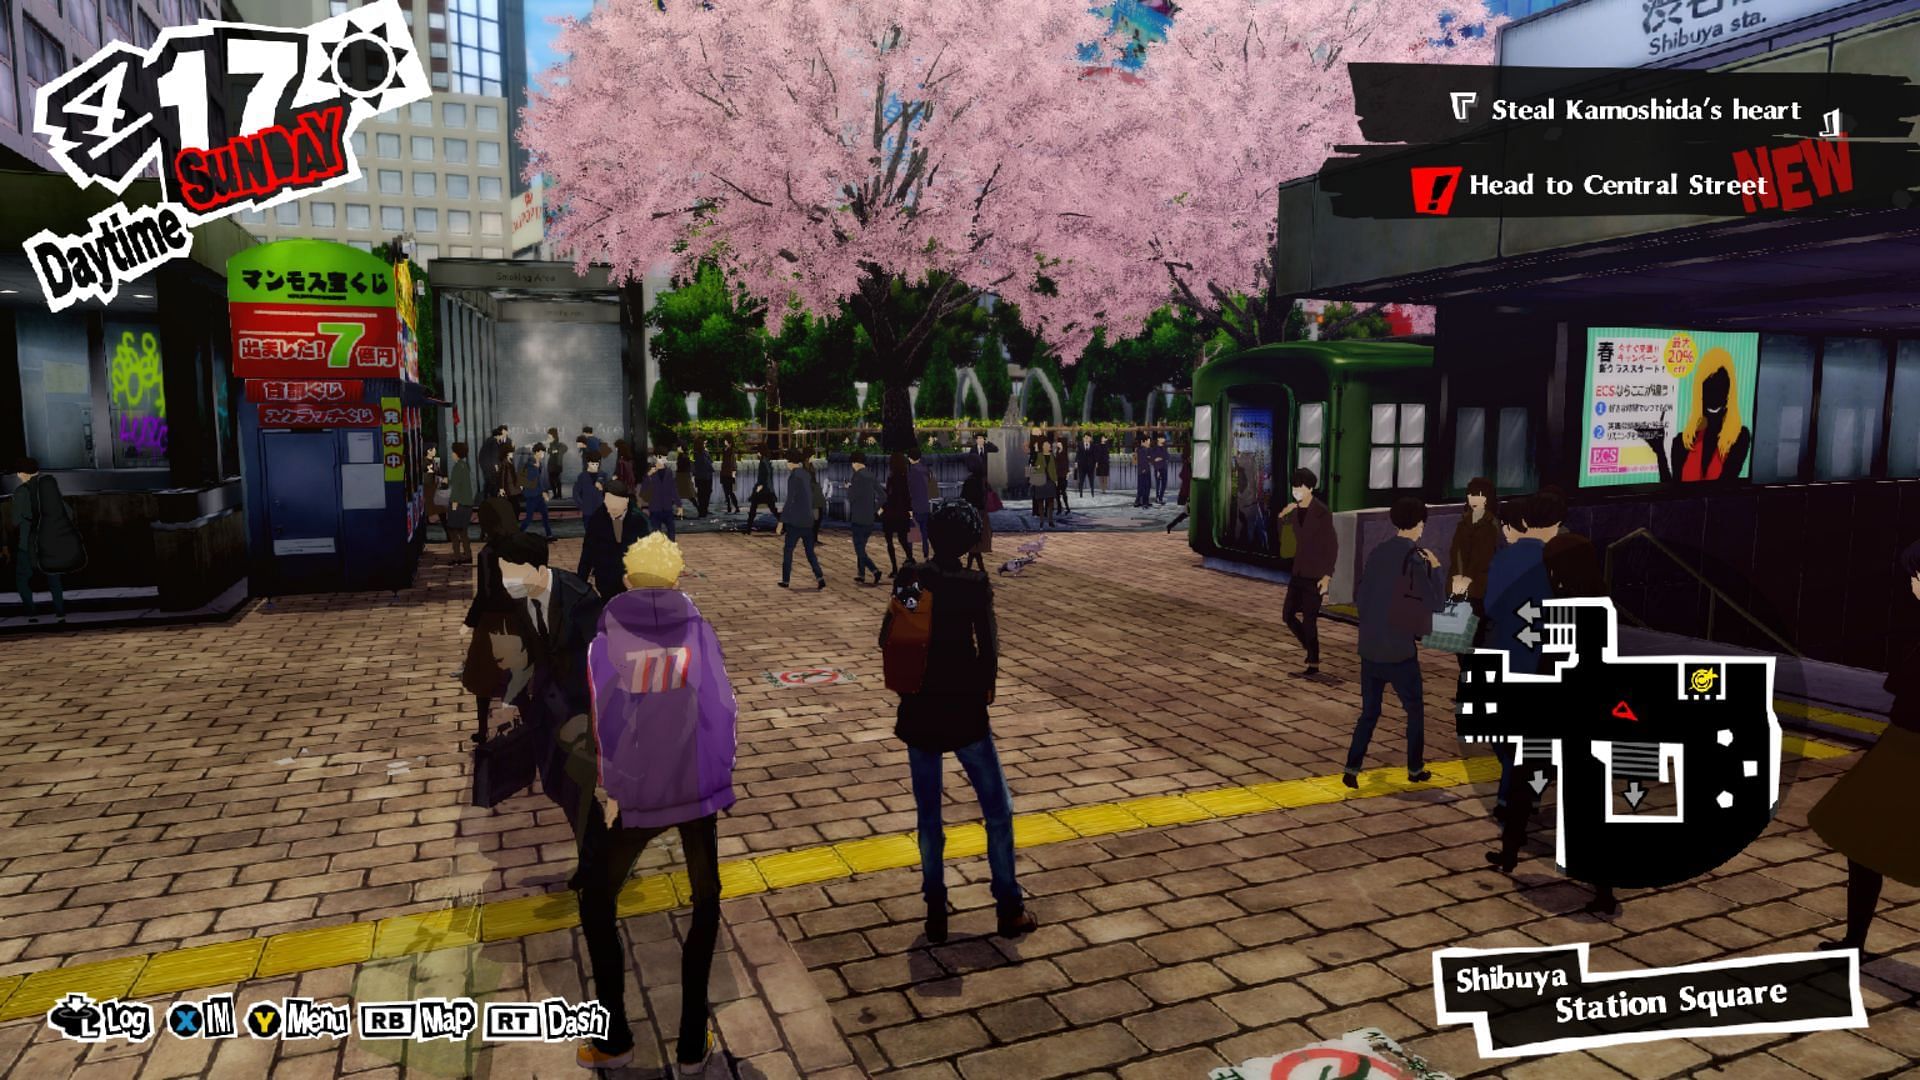 Enjoy student life with friends (Image via Persona 5 Royal)